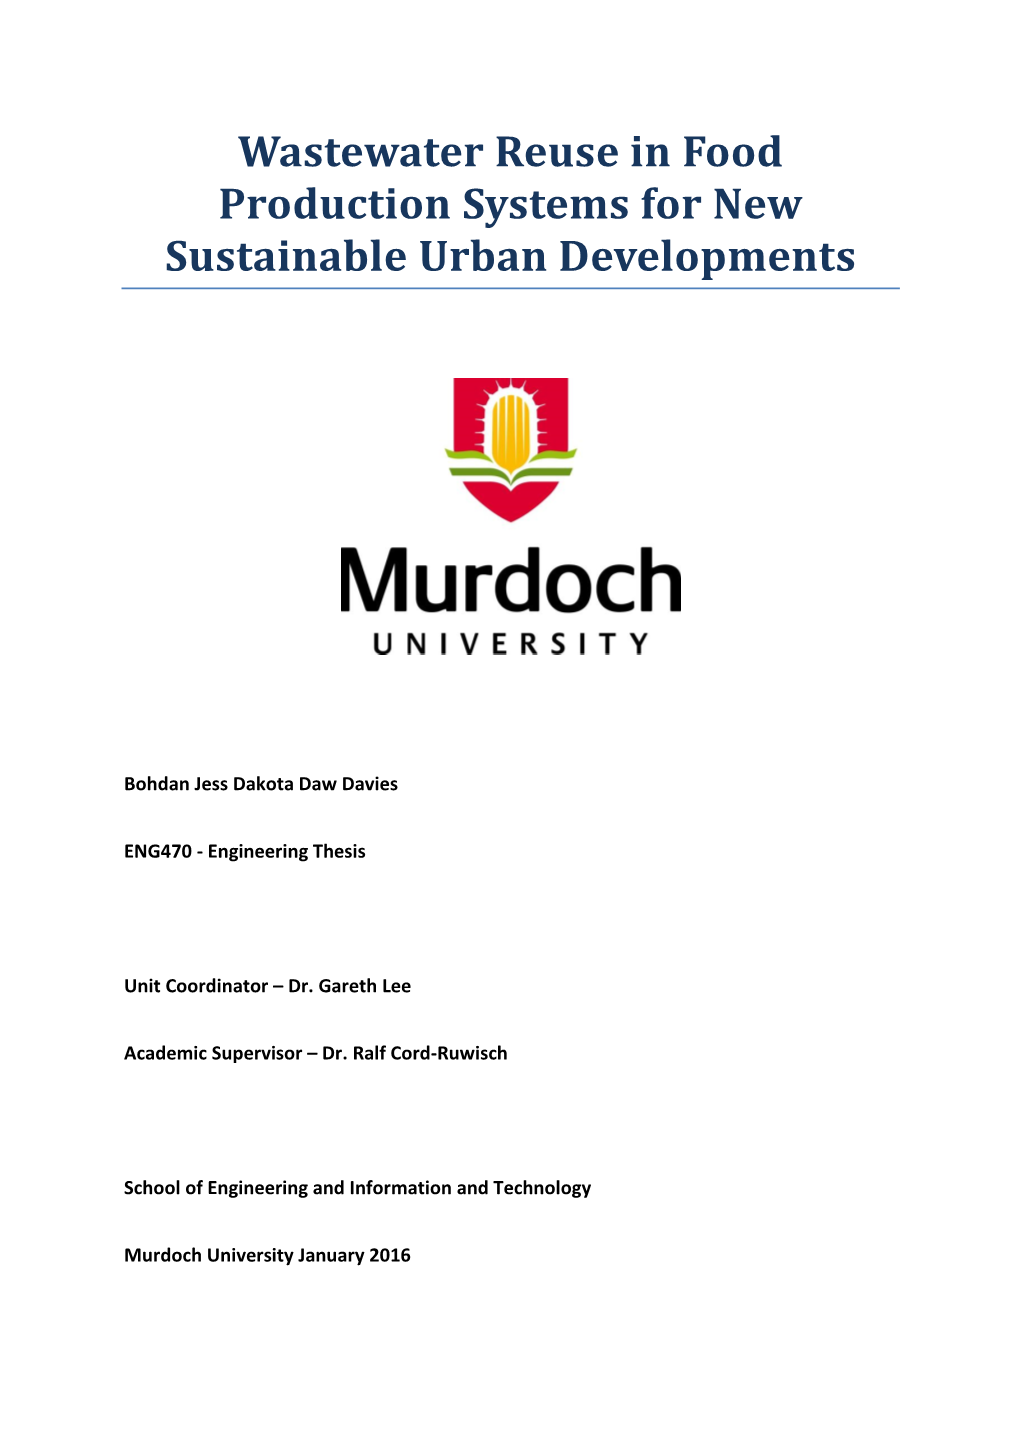 Wastewater Reuse in Food Production Systems for New Sustainable Urban Developments